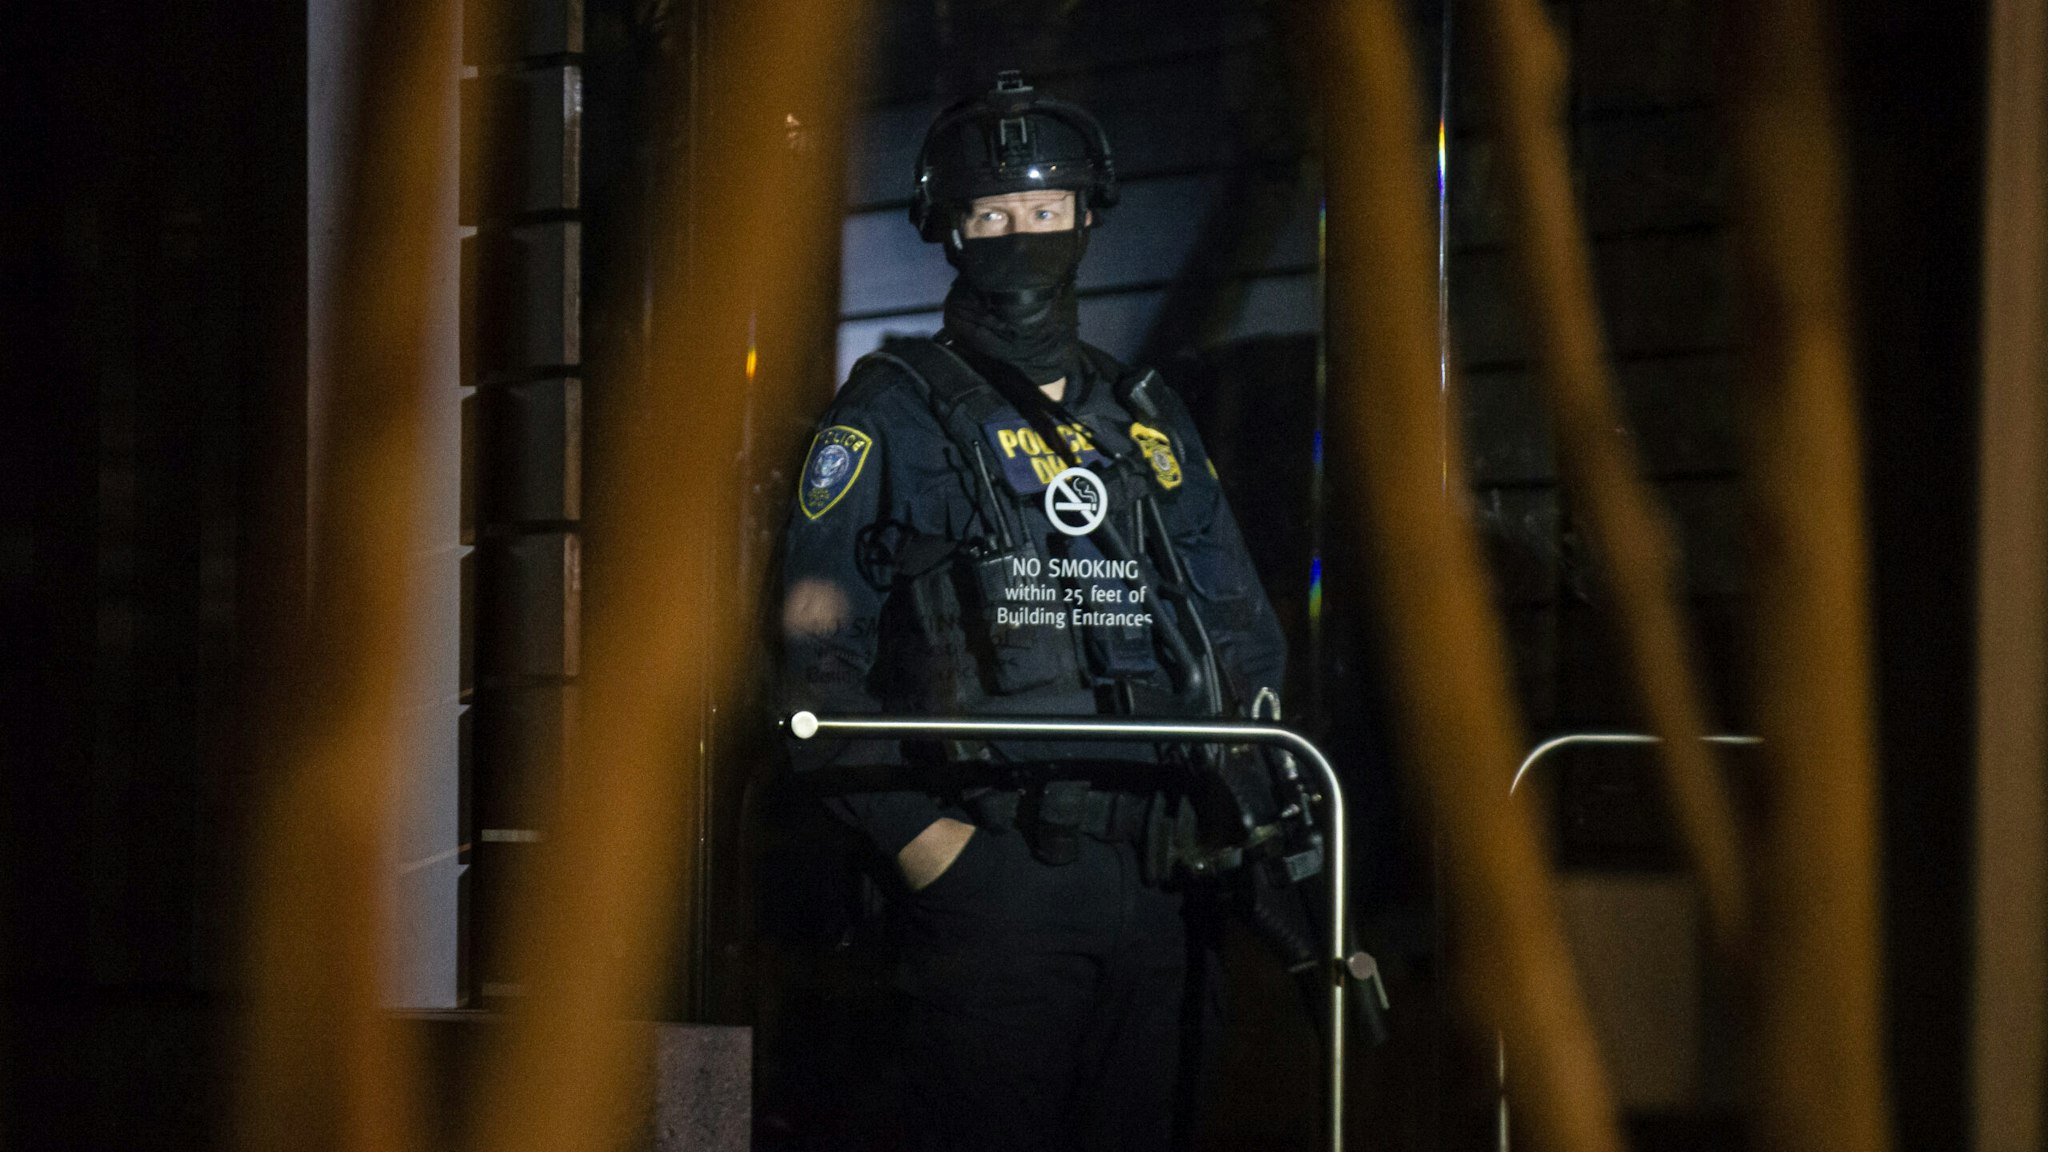 PORTLAND, OR - AUGUST 2: A federal officer guards the interior of the Edith Green - Wendell Wyatt Federal Building early in the morning on August 2, 2020 in Portland, Oregon. Federal officers began a phased withdrawal from the city on Thursday while leaving behind personnel inside the two downtown federal buildings. (Photo by Nathan Howard/Getty Images)